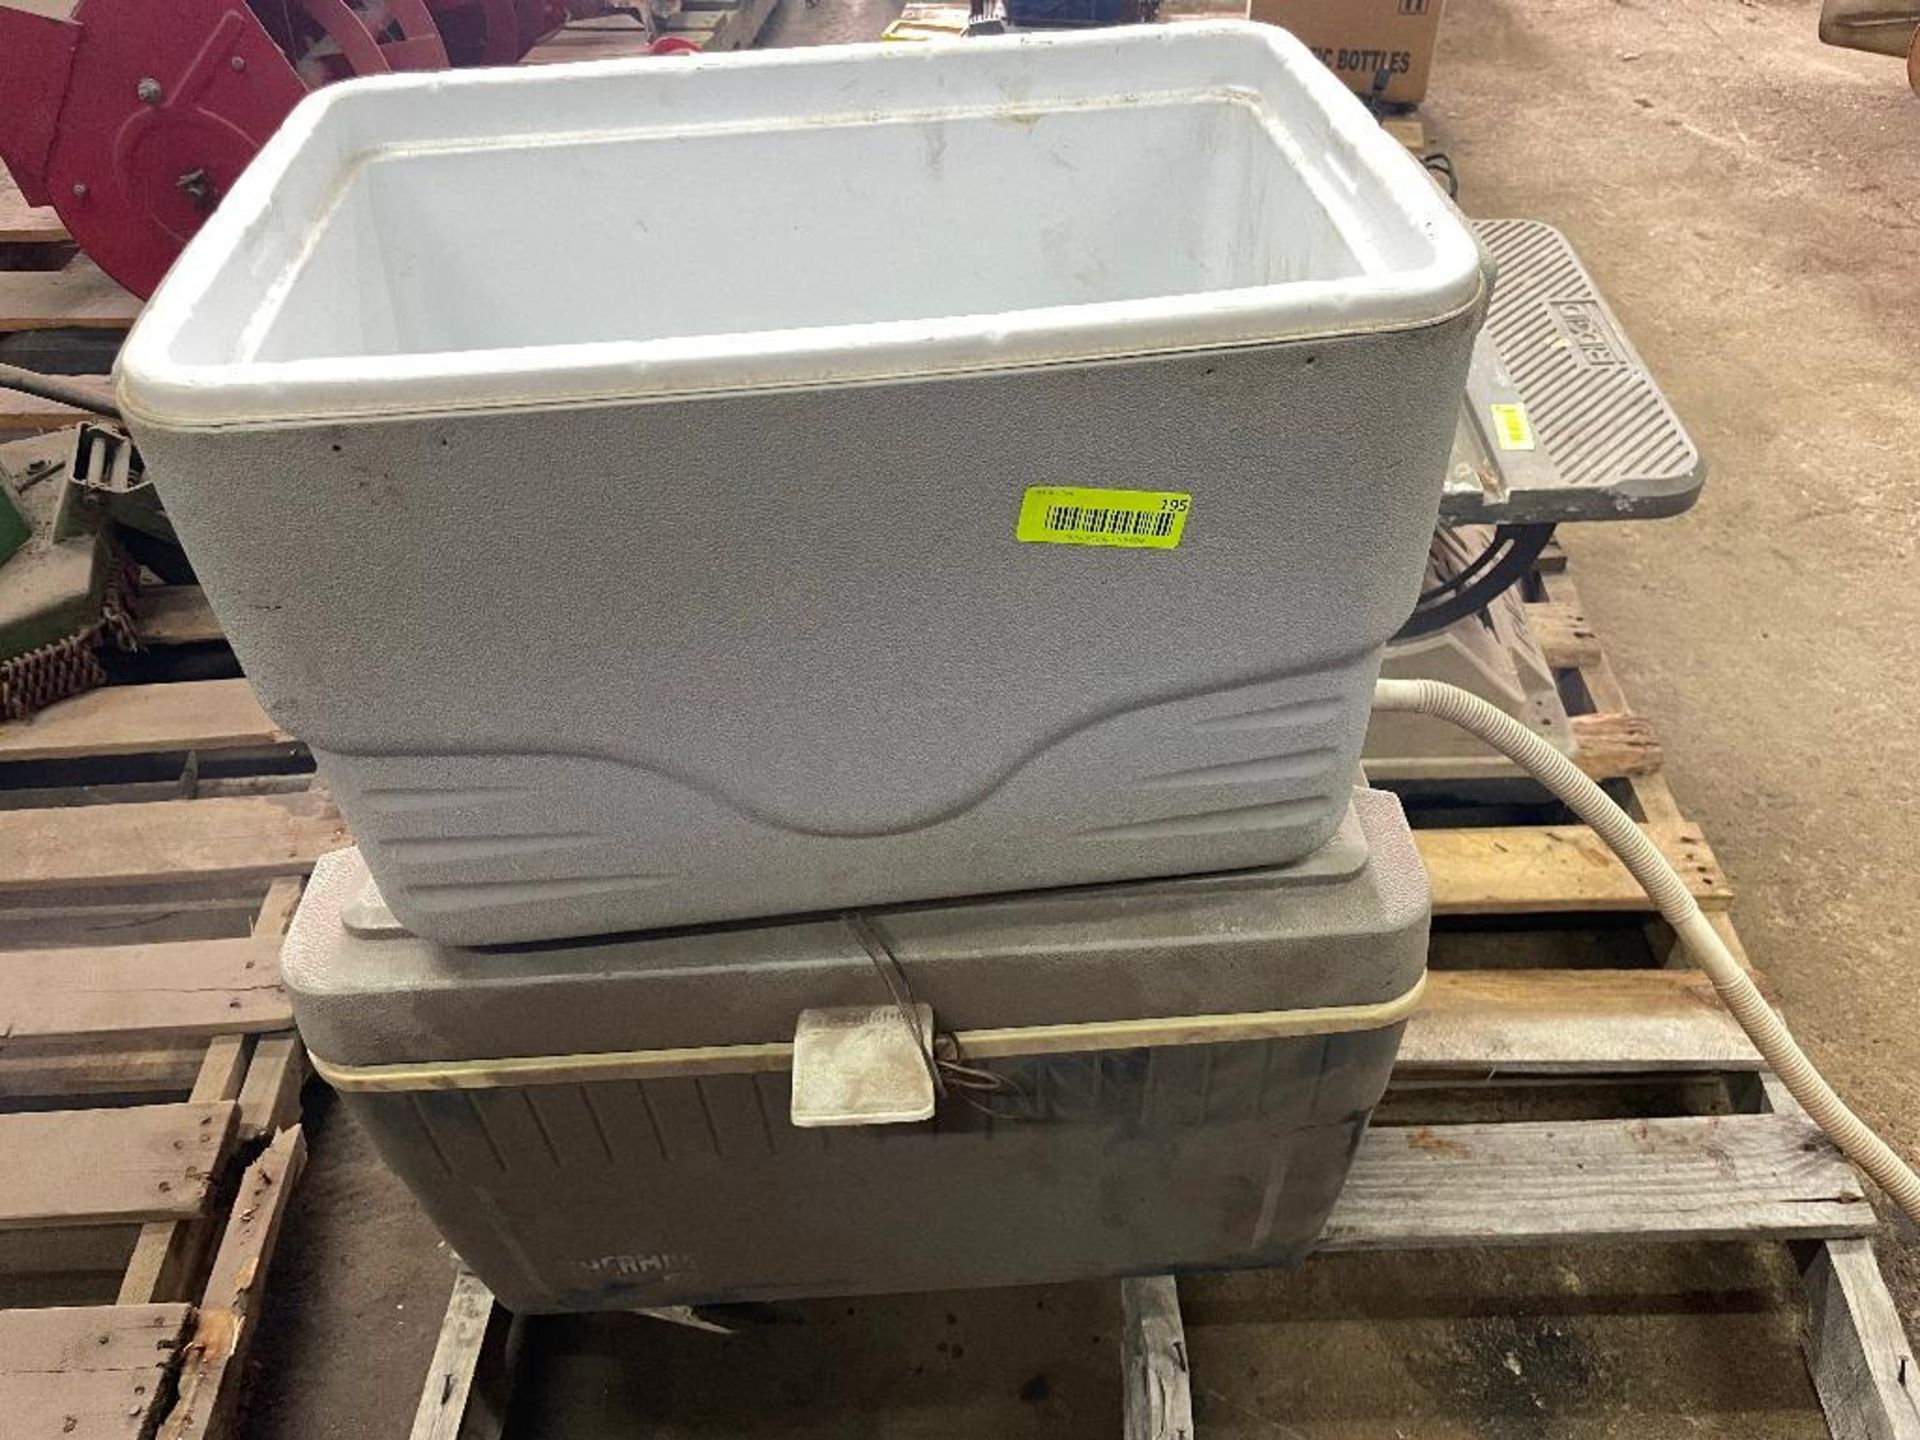 DESCRIPTION: (2) FISHING COOLERS W/ AIR PUMP LOCATION: SHOP THIS LOT IS: ONE MONEY QTY: 1 - Image 2 of 2